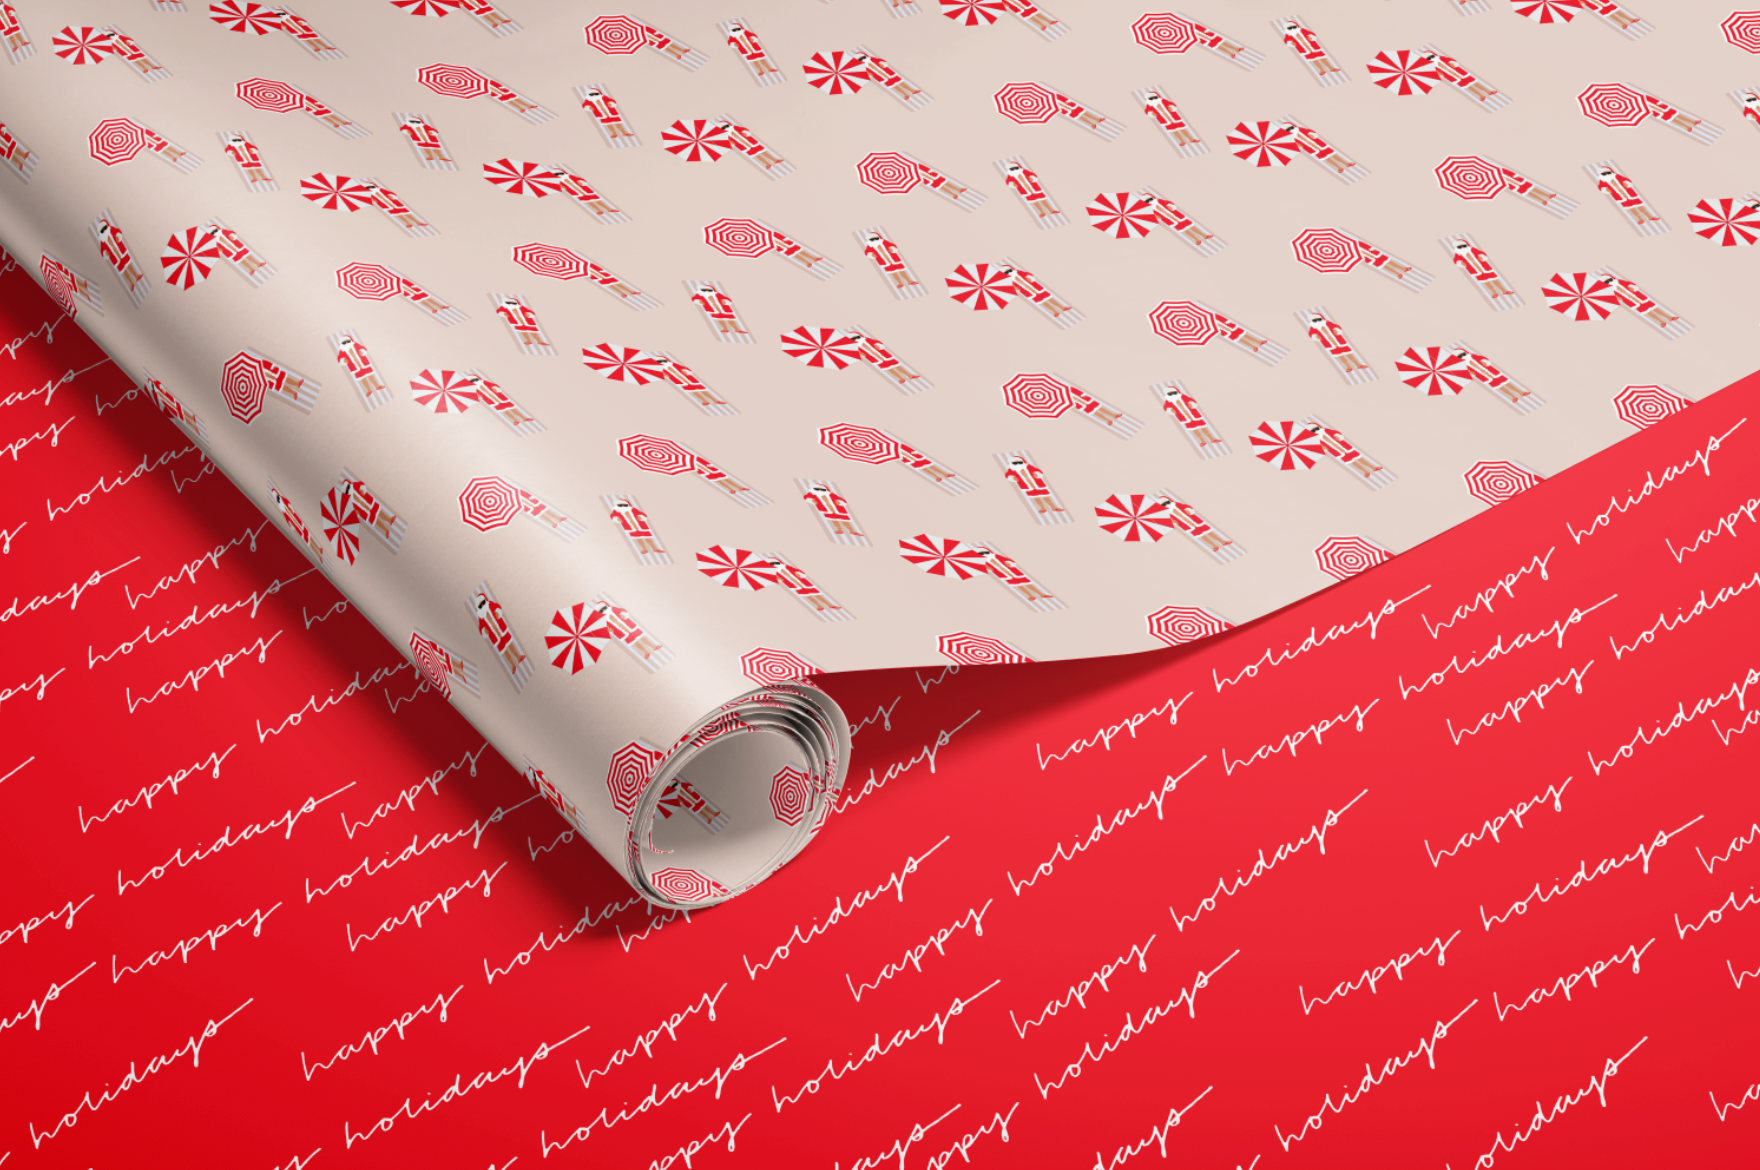 Santa on the Beach Tropical Christmas Wrapping Paper